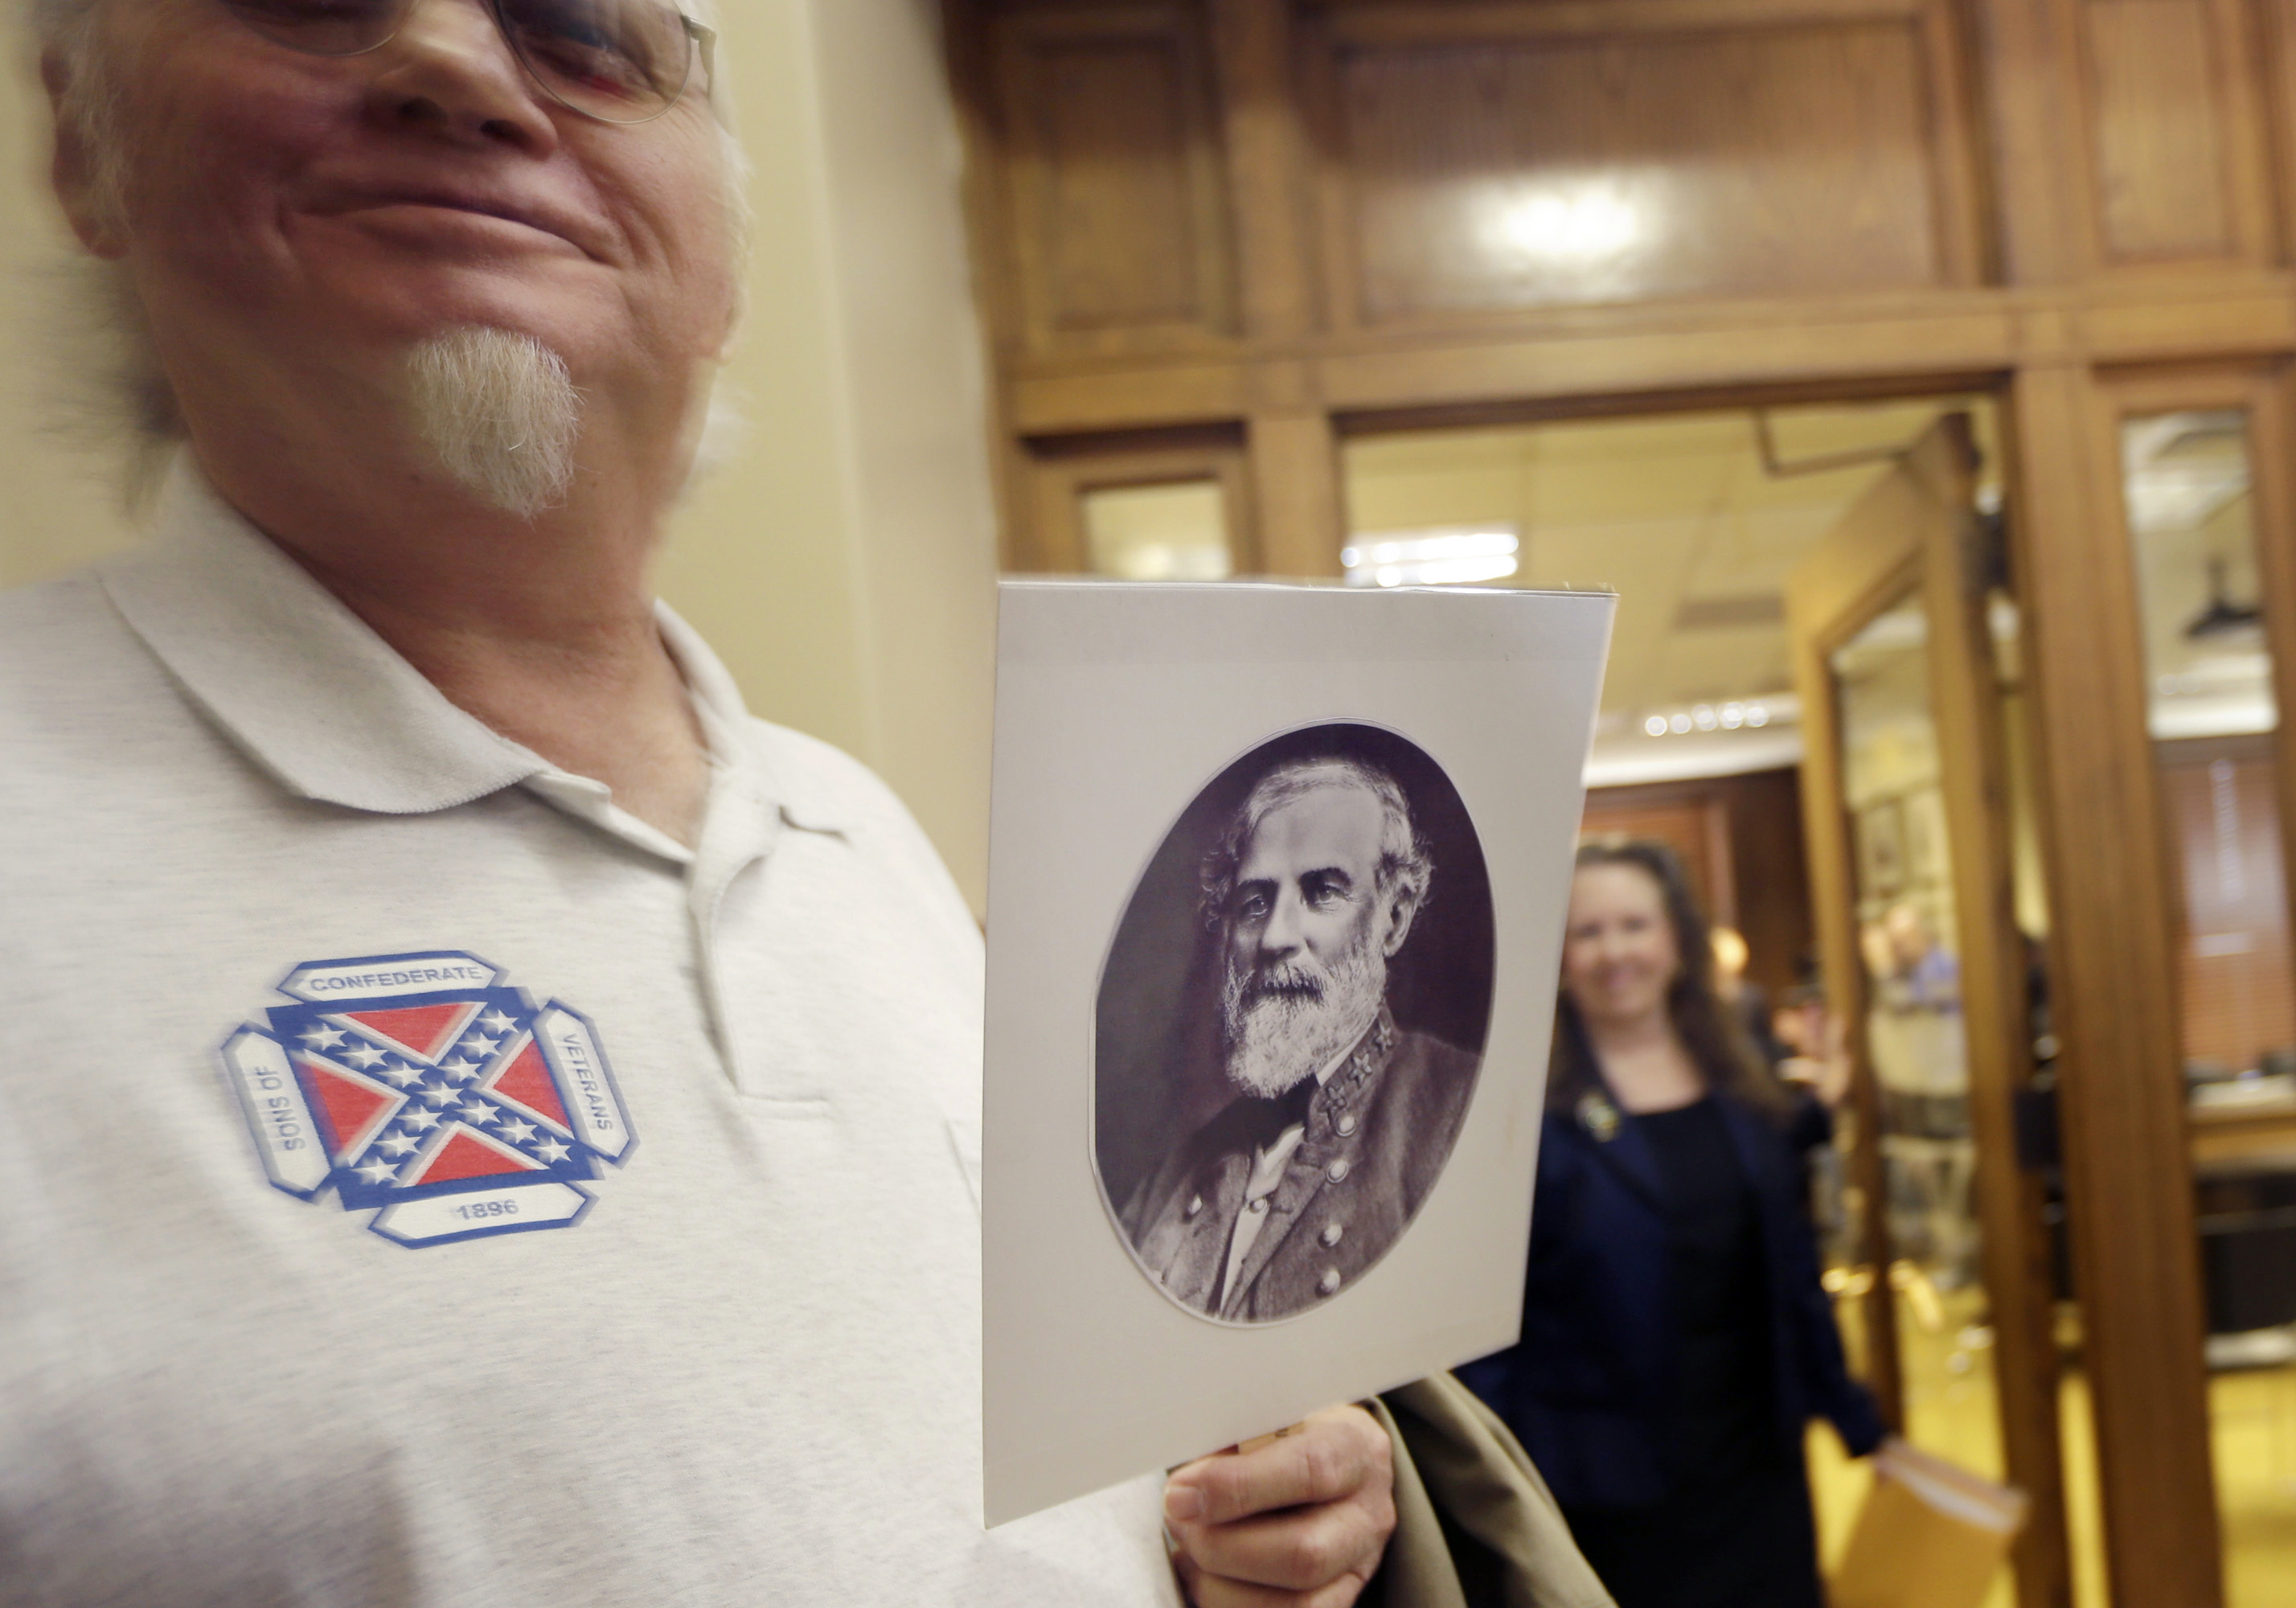 Dewey Spencer, of Judsonia, Ark., holds a portrait of Confederate Gen. Robert E. Lee after a meeting of the House Committee on State Agencies and Governmental Affairs, Wednesday, Jan. 28, 2015, at the State Capitol in Little Rock, Ark. (Danny Johnston—AP)